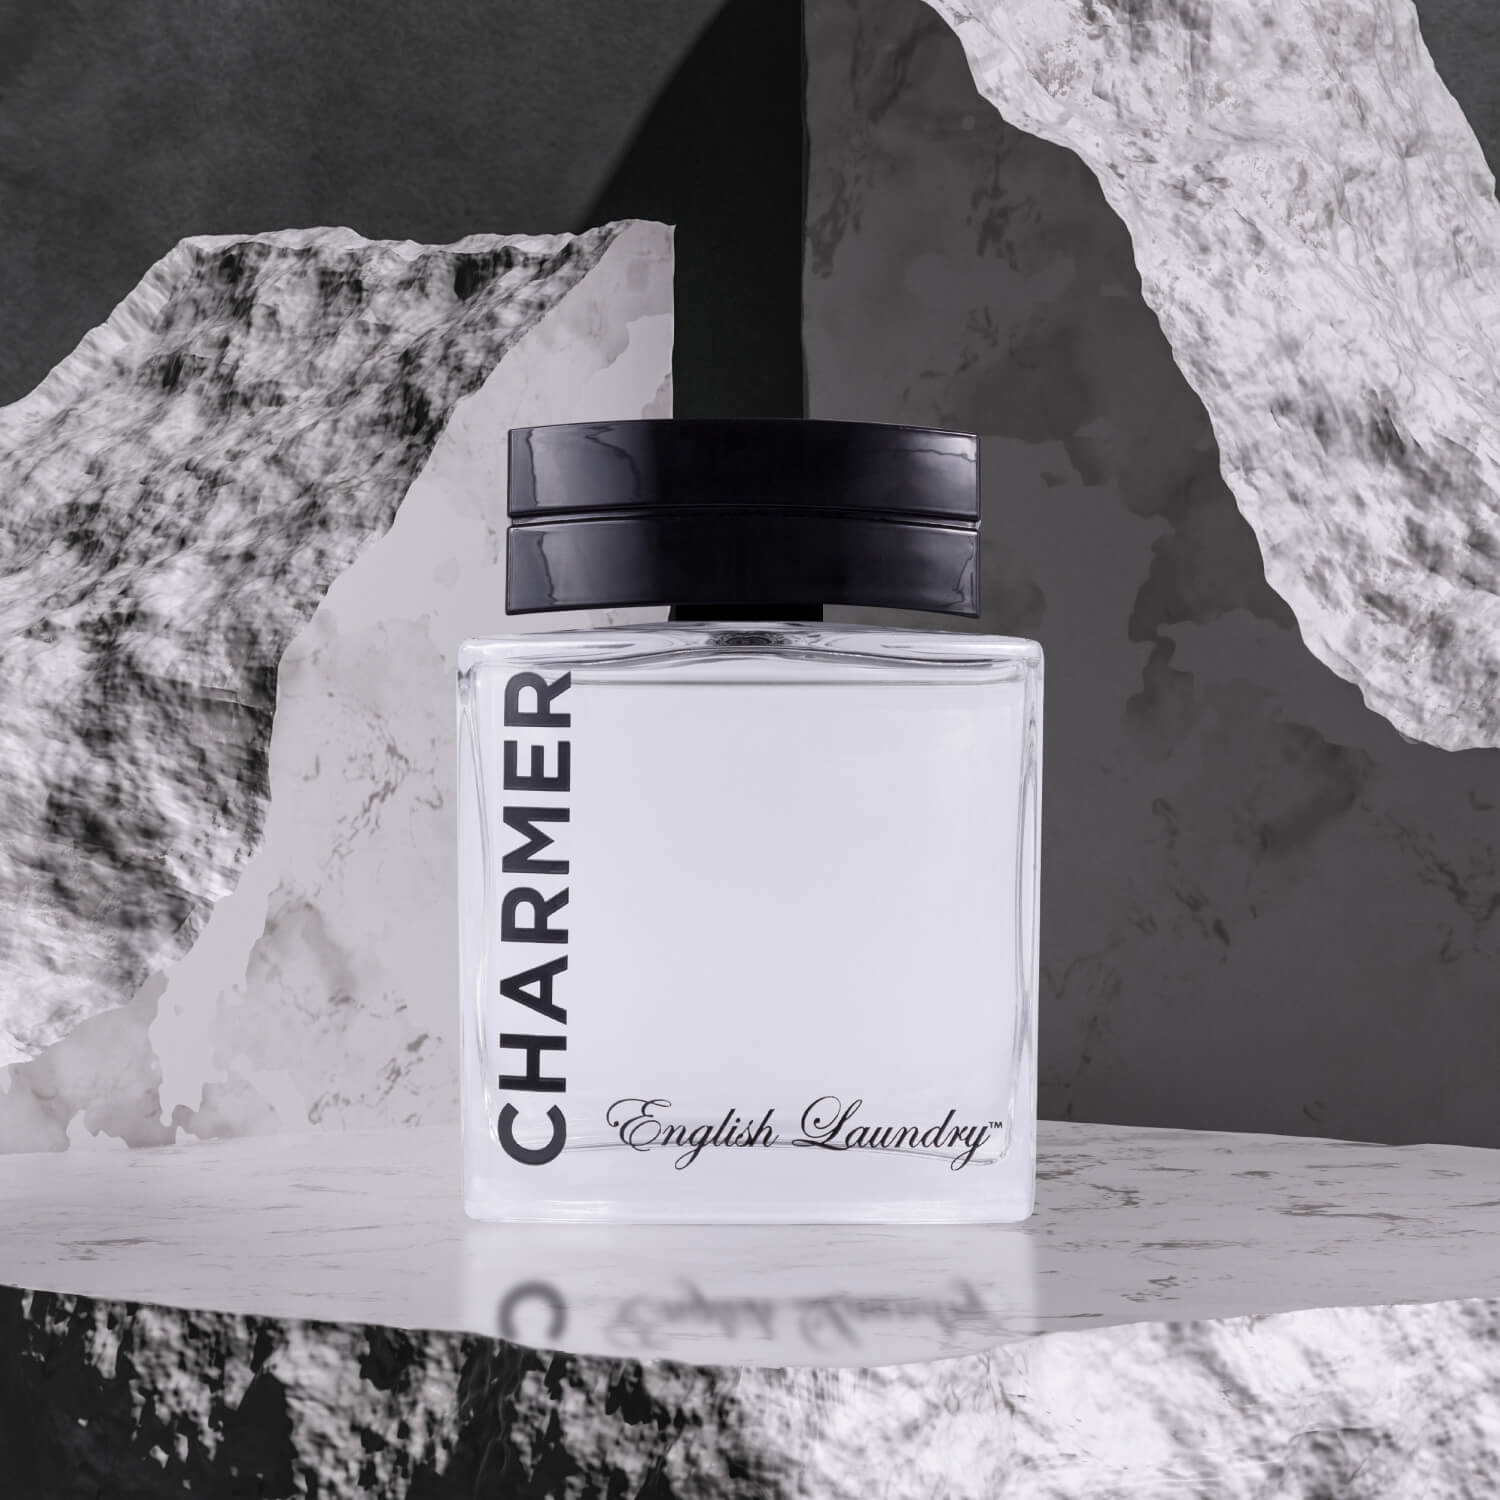 Score English Laundry Charmer at Scentbird for $16.95